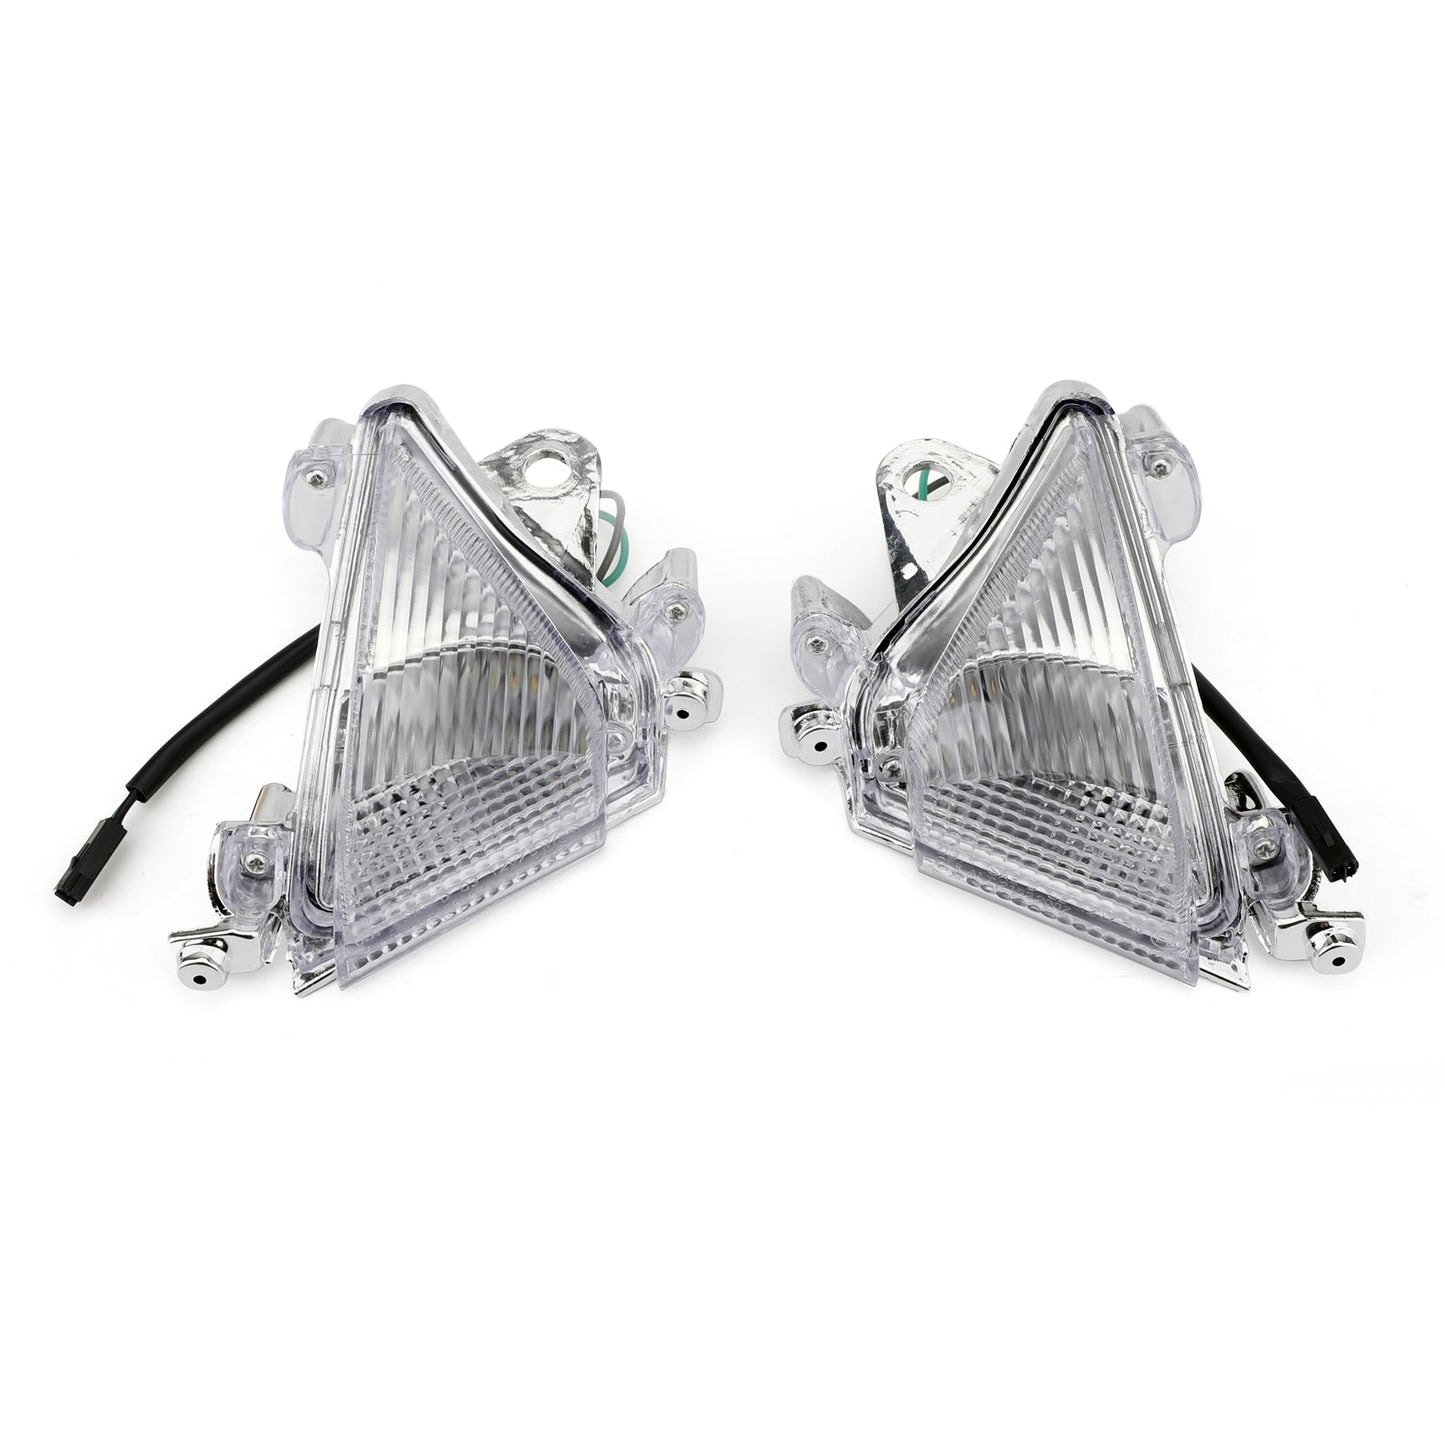 Front Turn Signals Lens For Kawasaki ZX10R 2004-2005 Clear